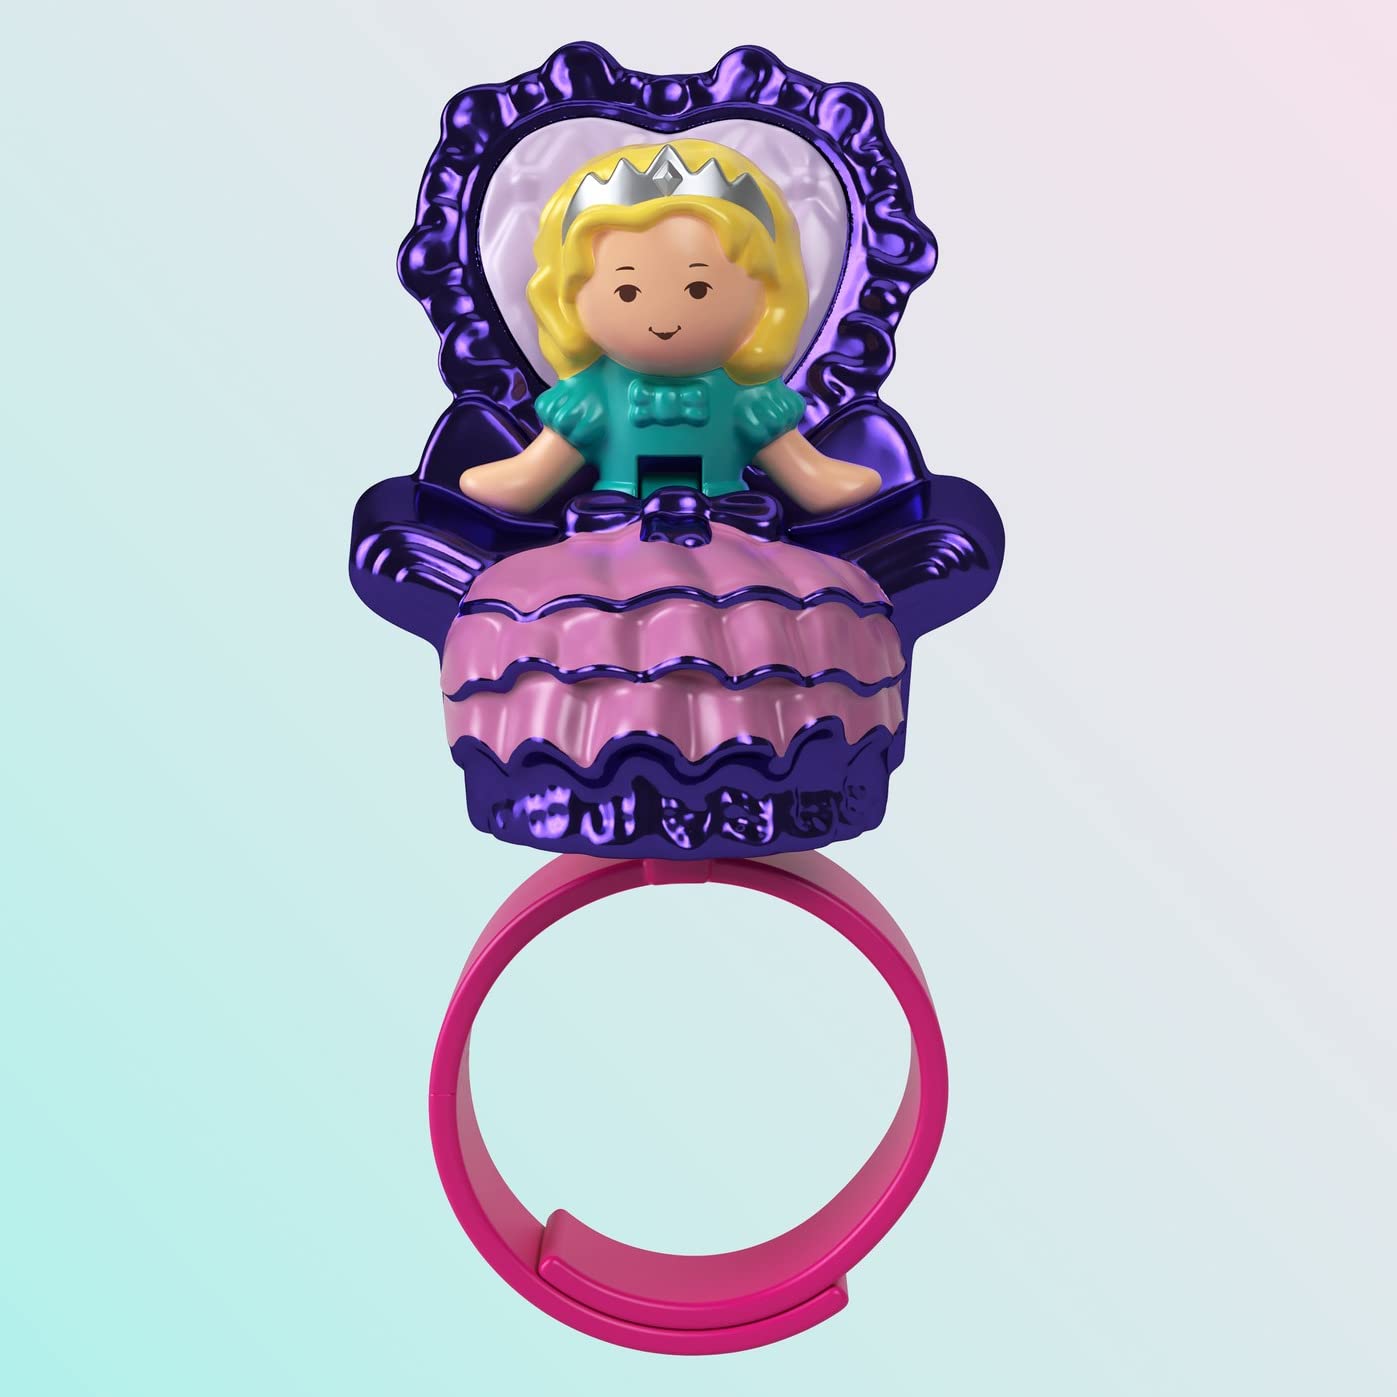 Polly Pocket Collector Compact with 2 Dolls, Keepsake Collection Royal Ball Jewelry Set, Collectible Toy with Unicorn Castle Theme